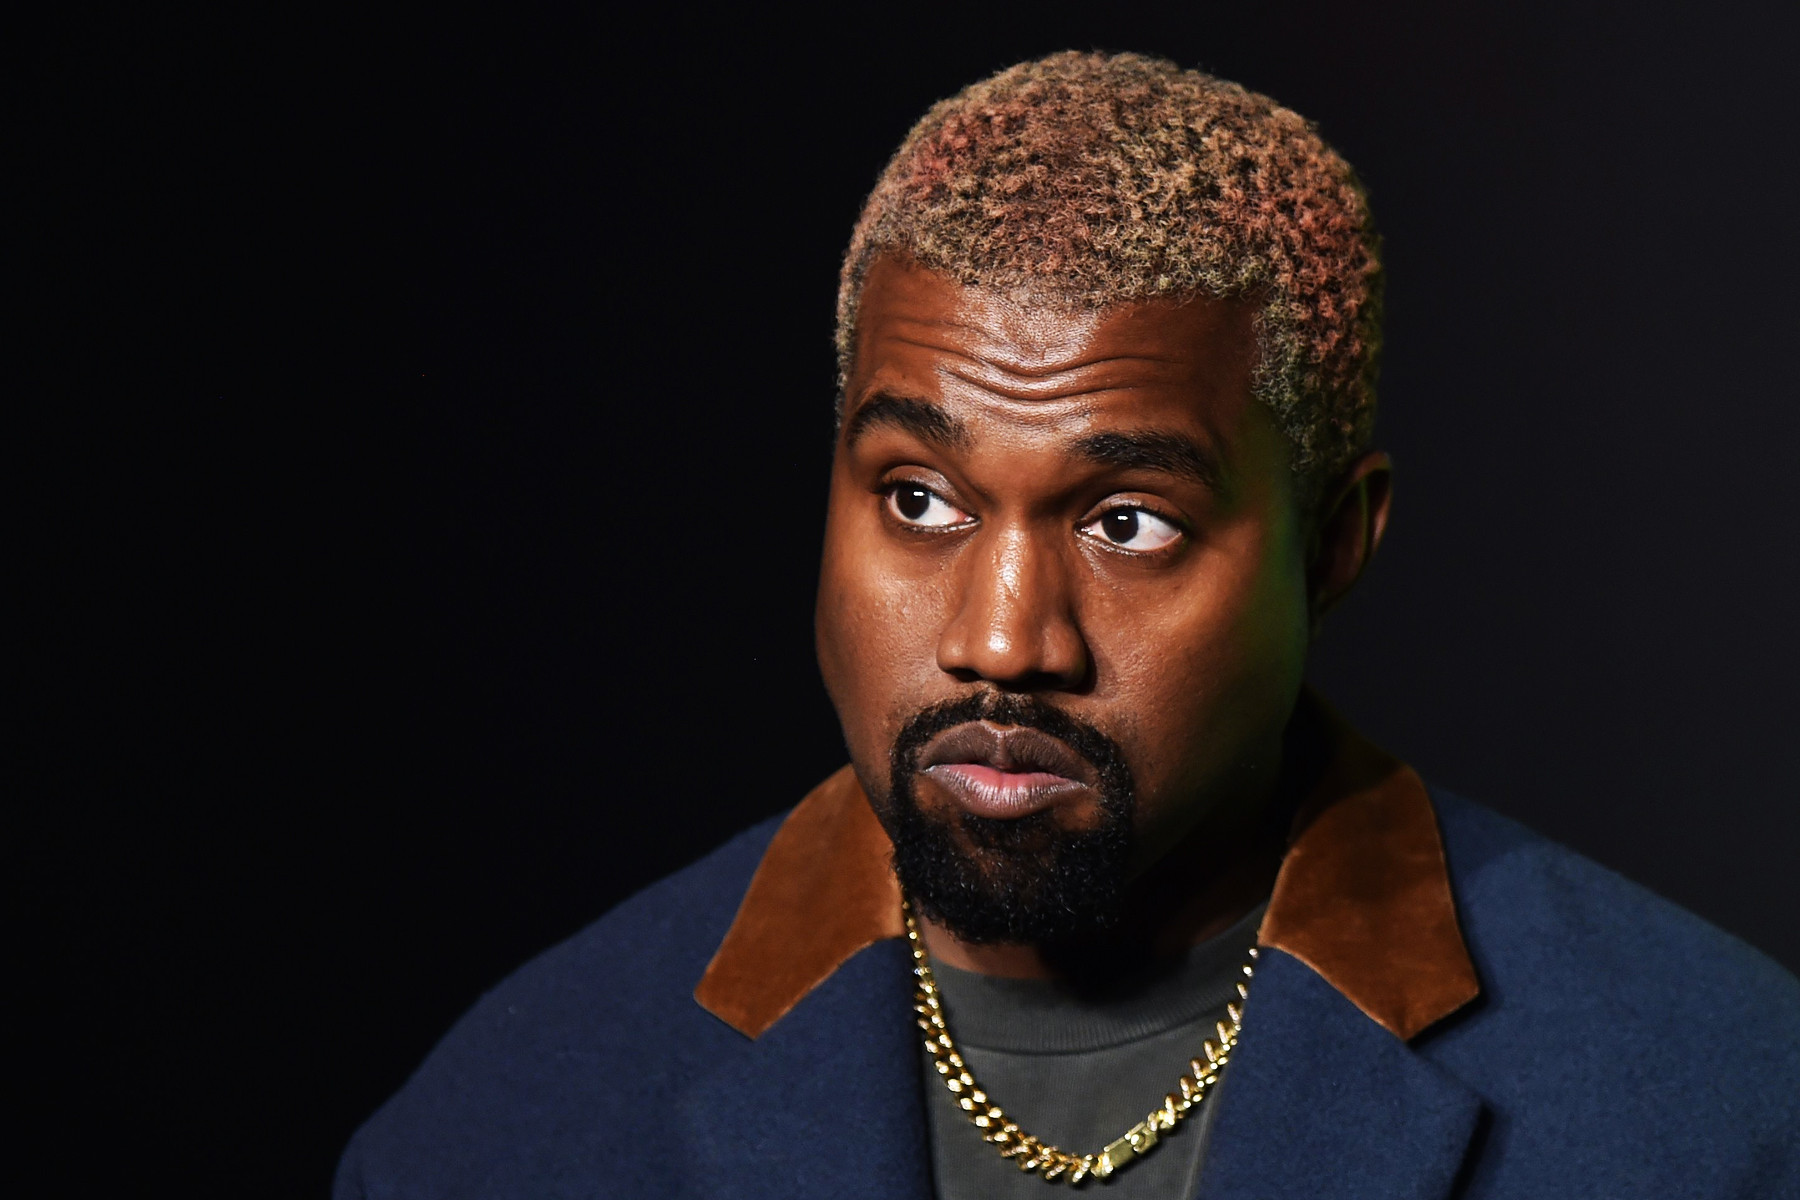 Kanye West Cancels Coachella Performance Because the Festival Wouldn’t Build Him a Giant Dome